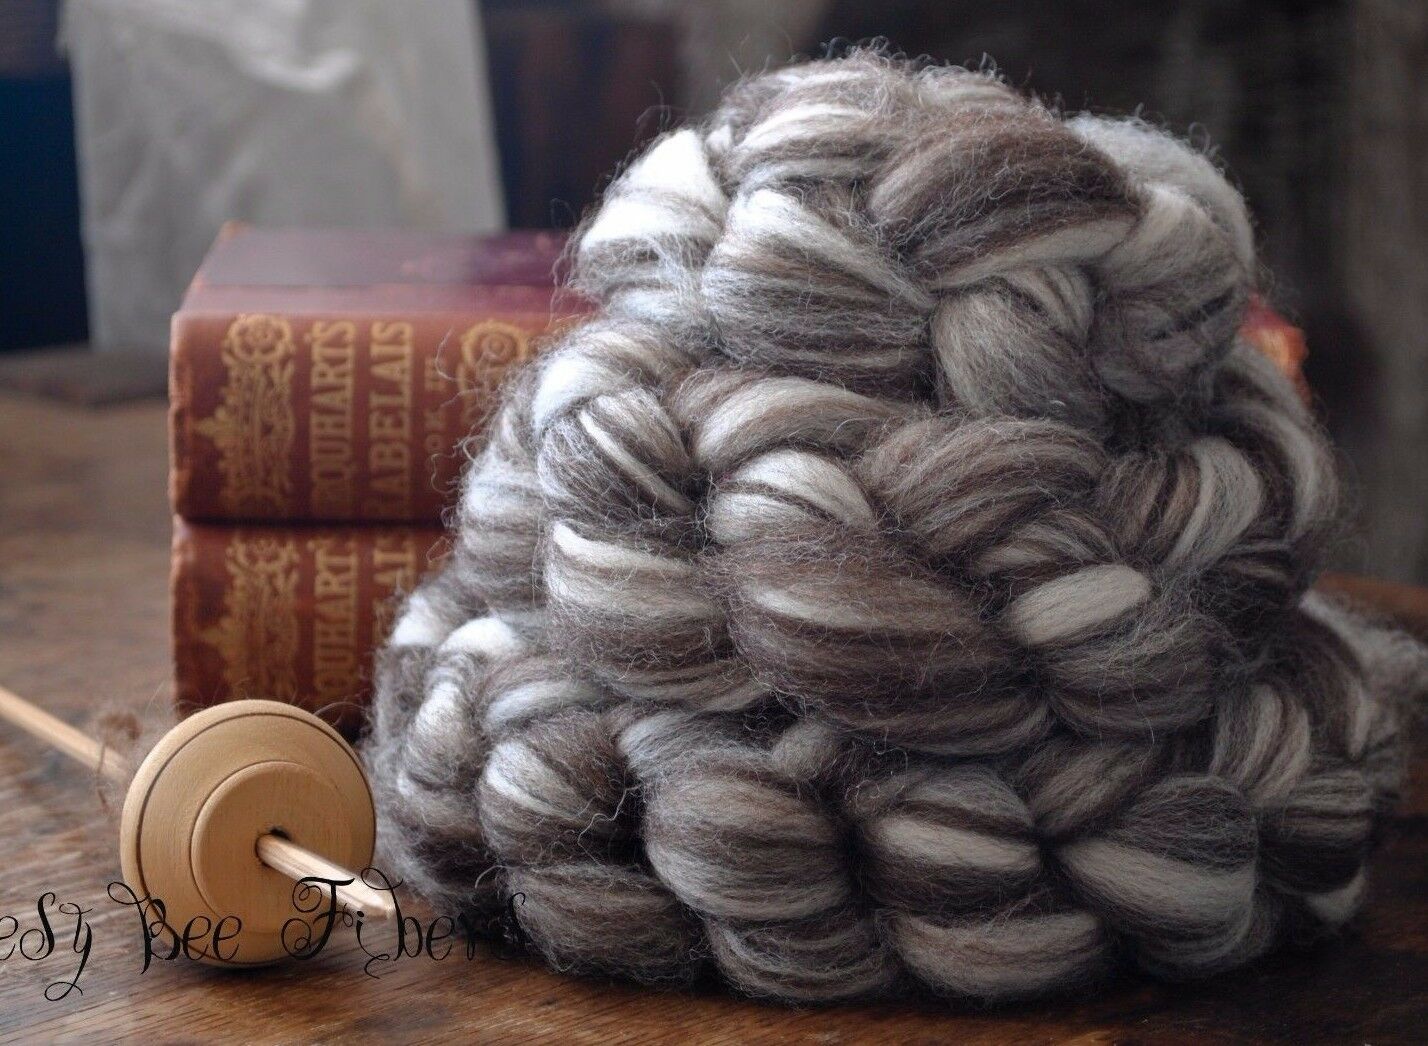 Corriedale Natural Wool Roving Combed Top Spinning Or Felting Fiber  4 Oz